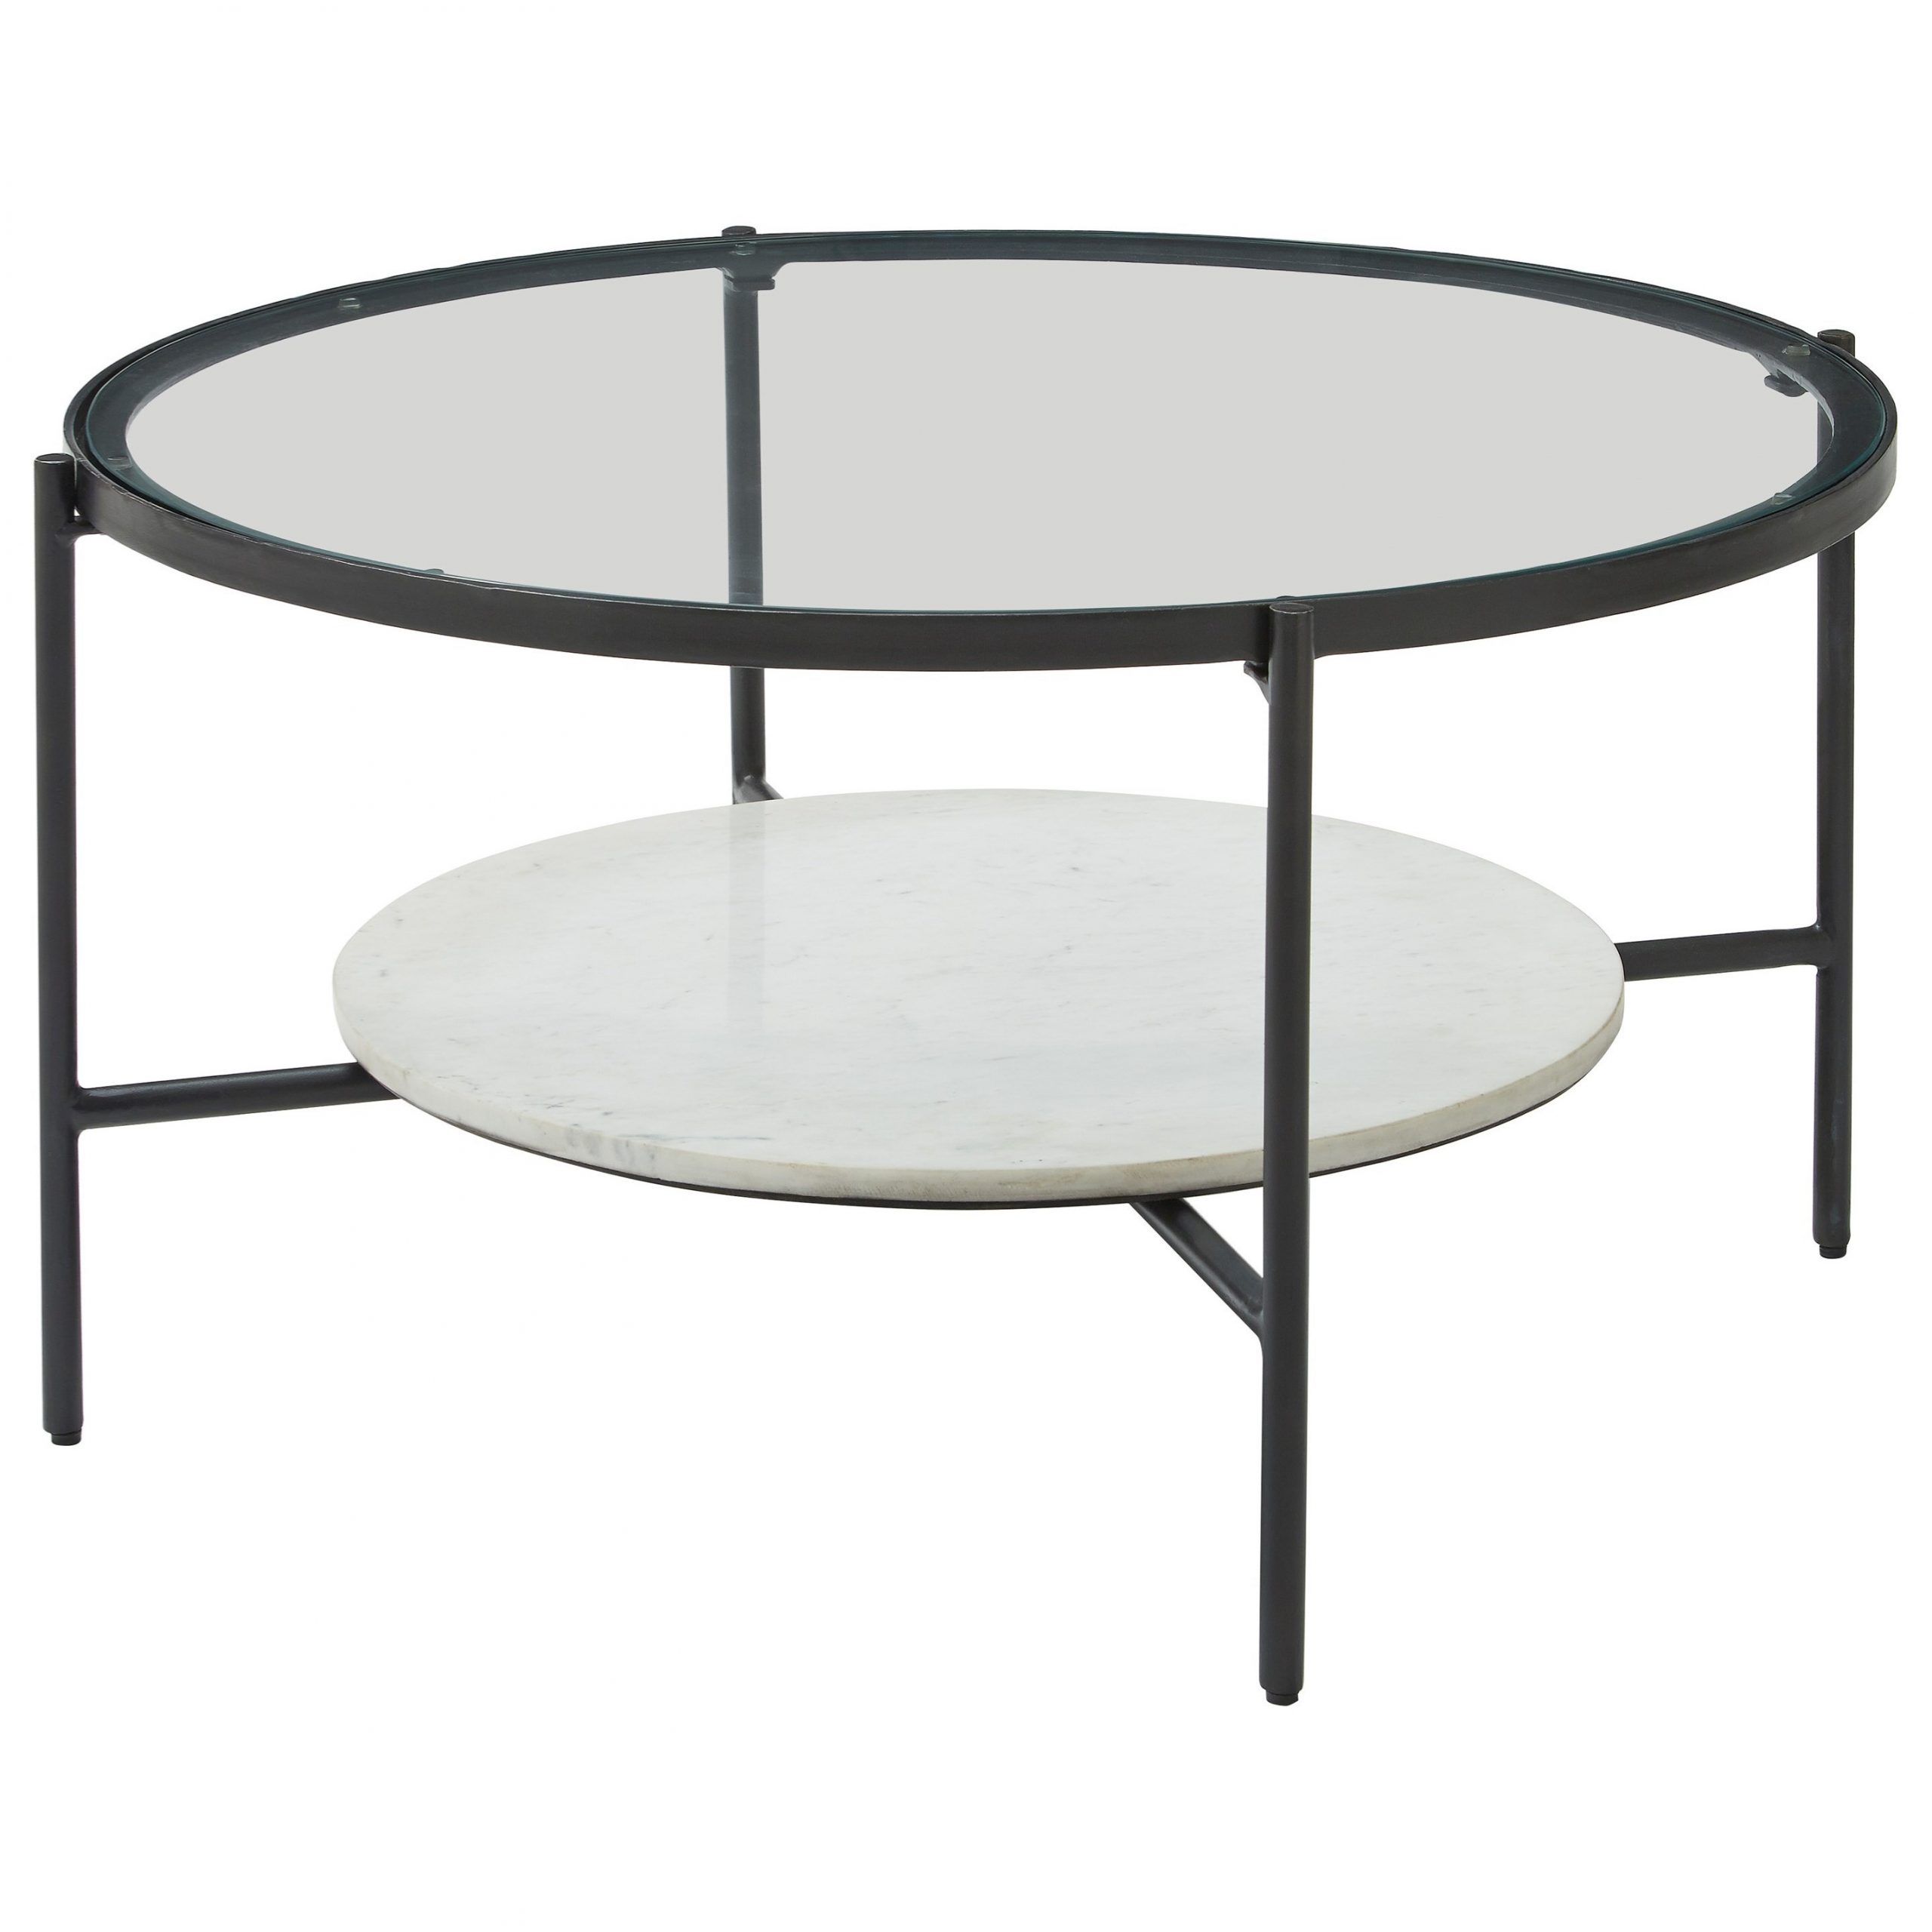 Most Recent Black Round Glass Top Cocktail Tables Inside Signature Zia Black Metal Round Cocktail Table With Glass (View 4 of 20)